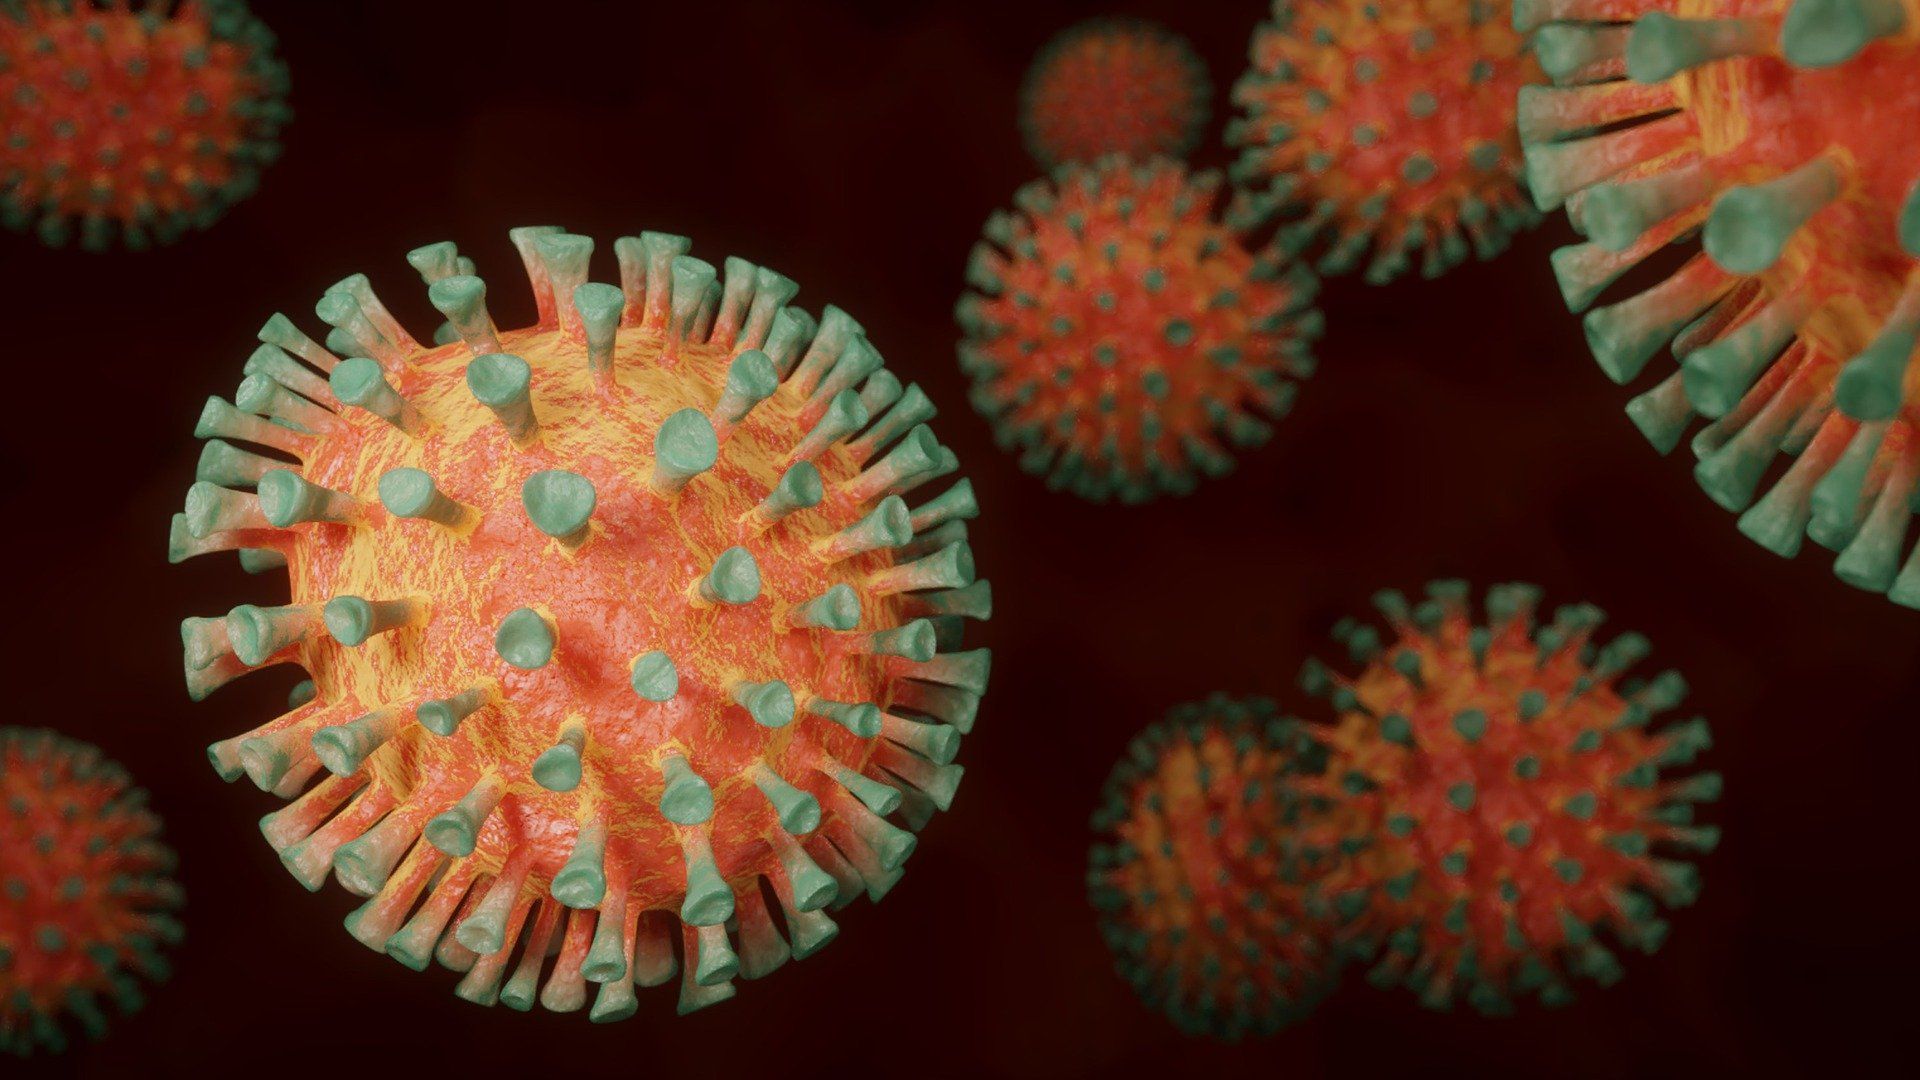 COVID outbreak in an Oklahoma gymnastics facility infected 47: CDC report